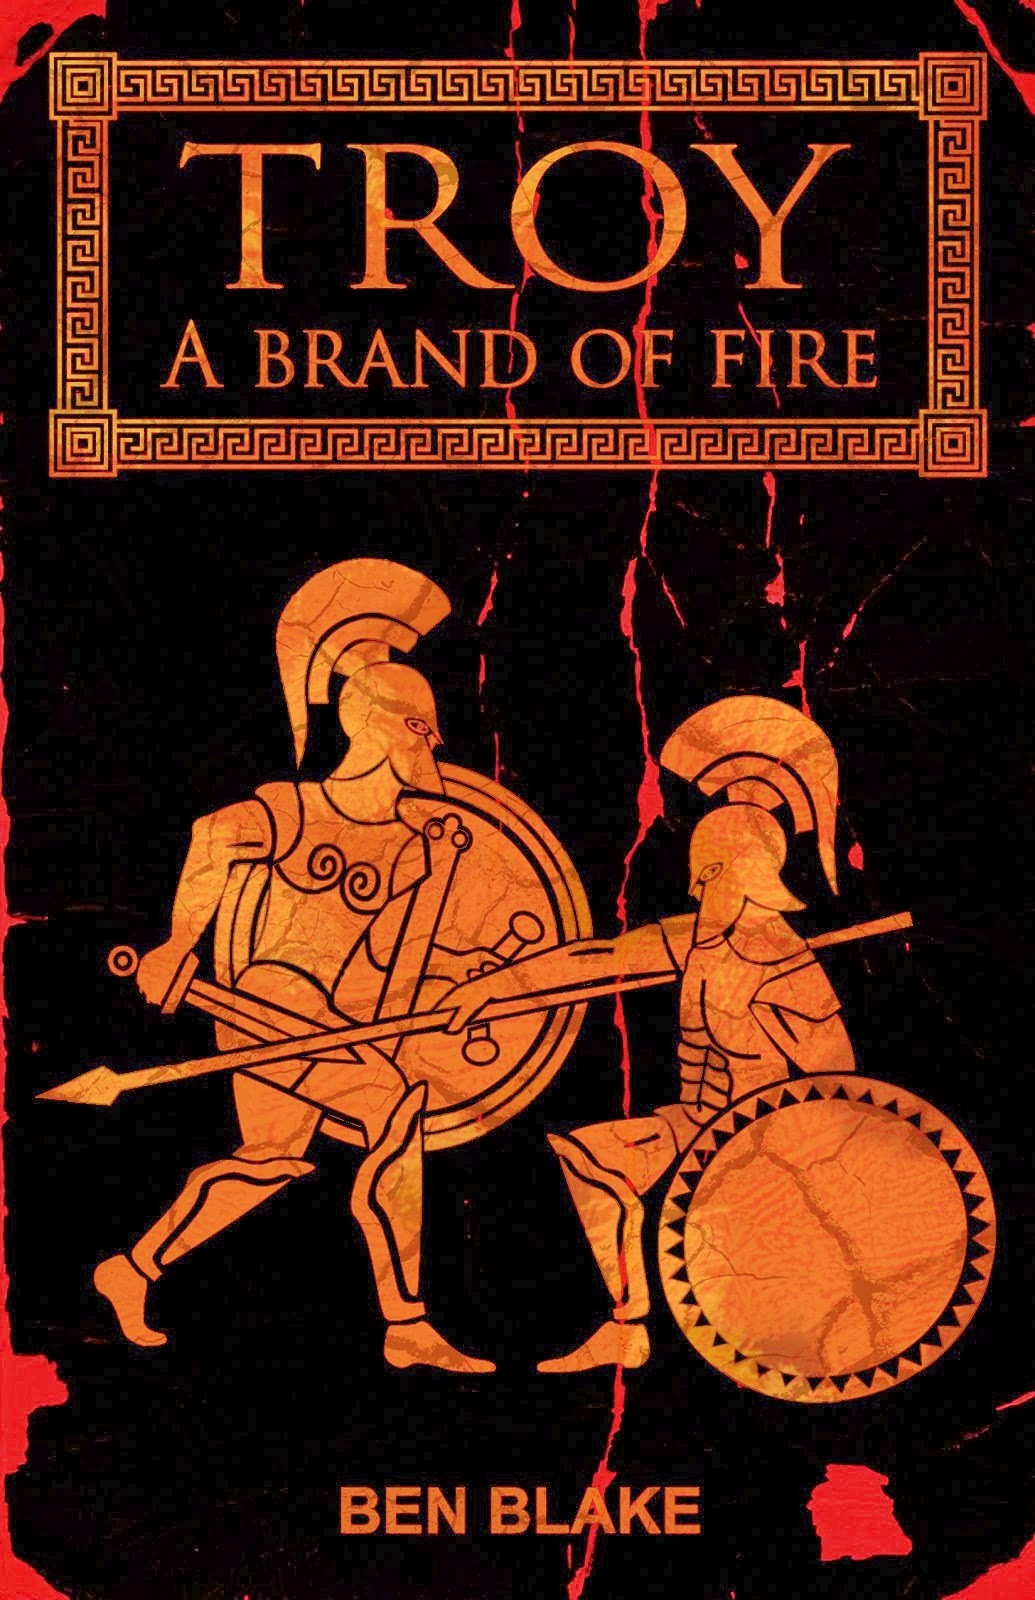 A Brand of Fire